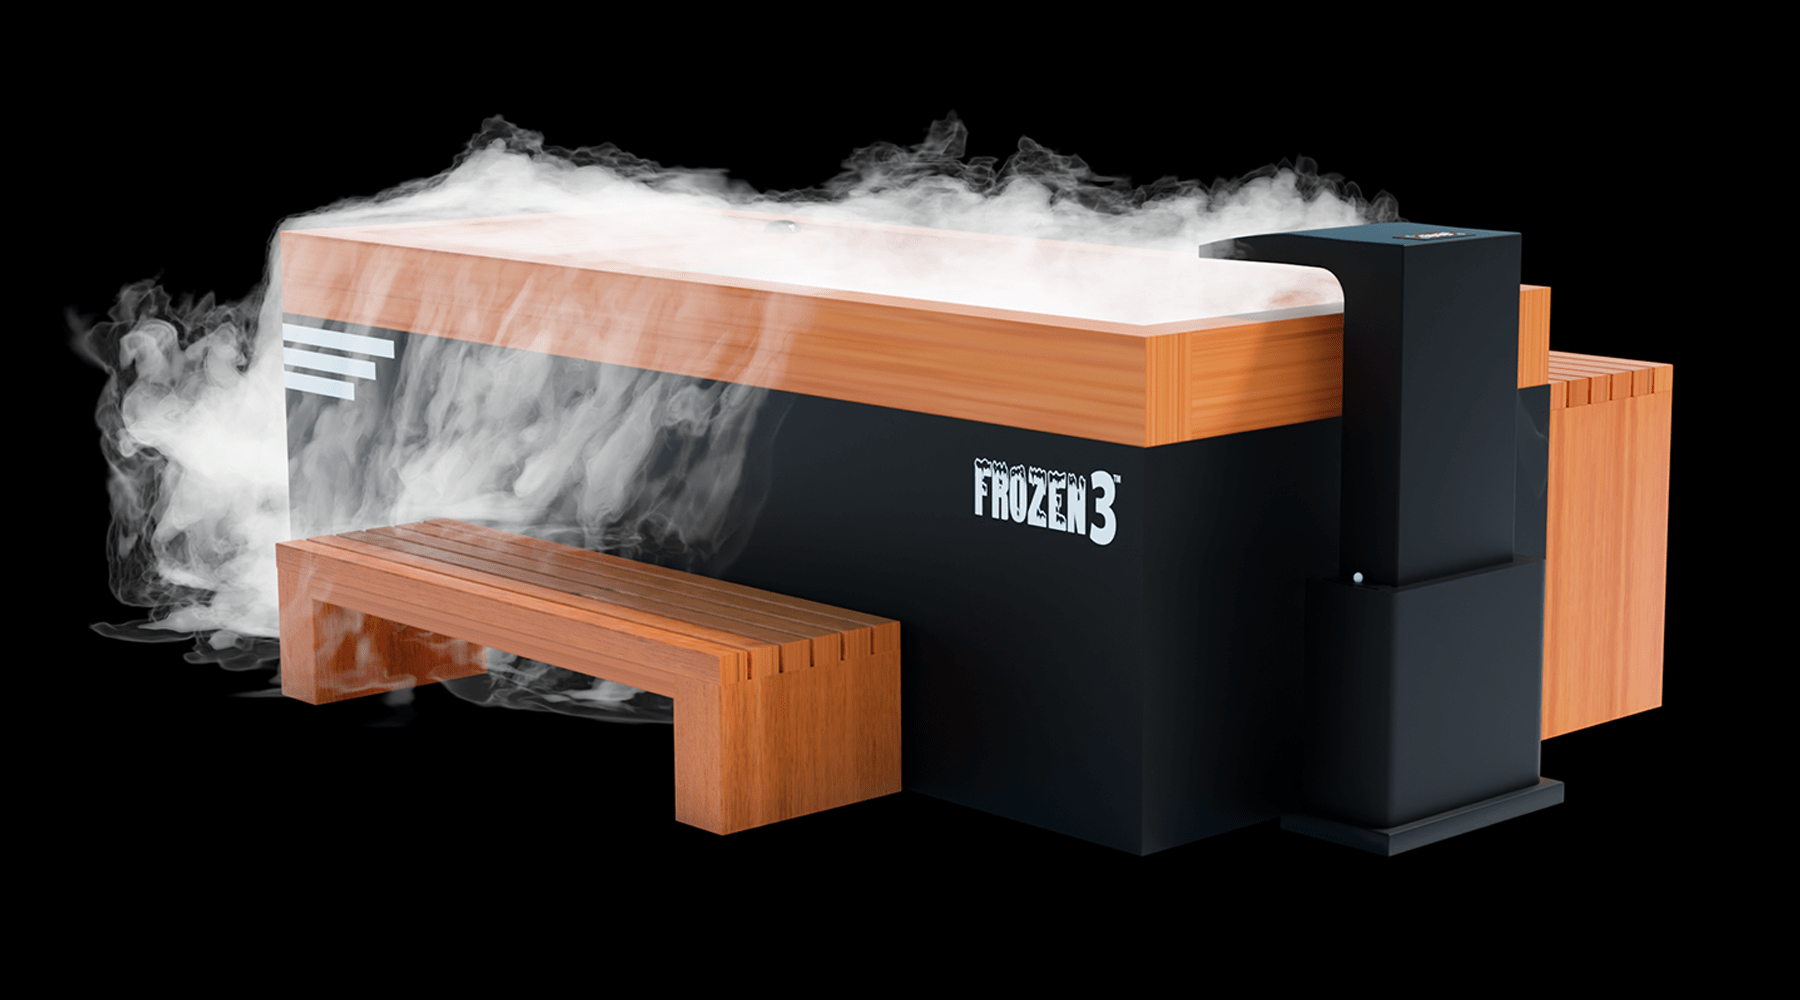 Medical Breakthrough - Frozen 3 Cold Plunge - Bar Counter & Heavy Duty Step / Essential Oil Infuser & Steam Generator